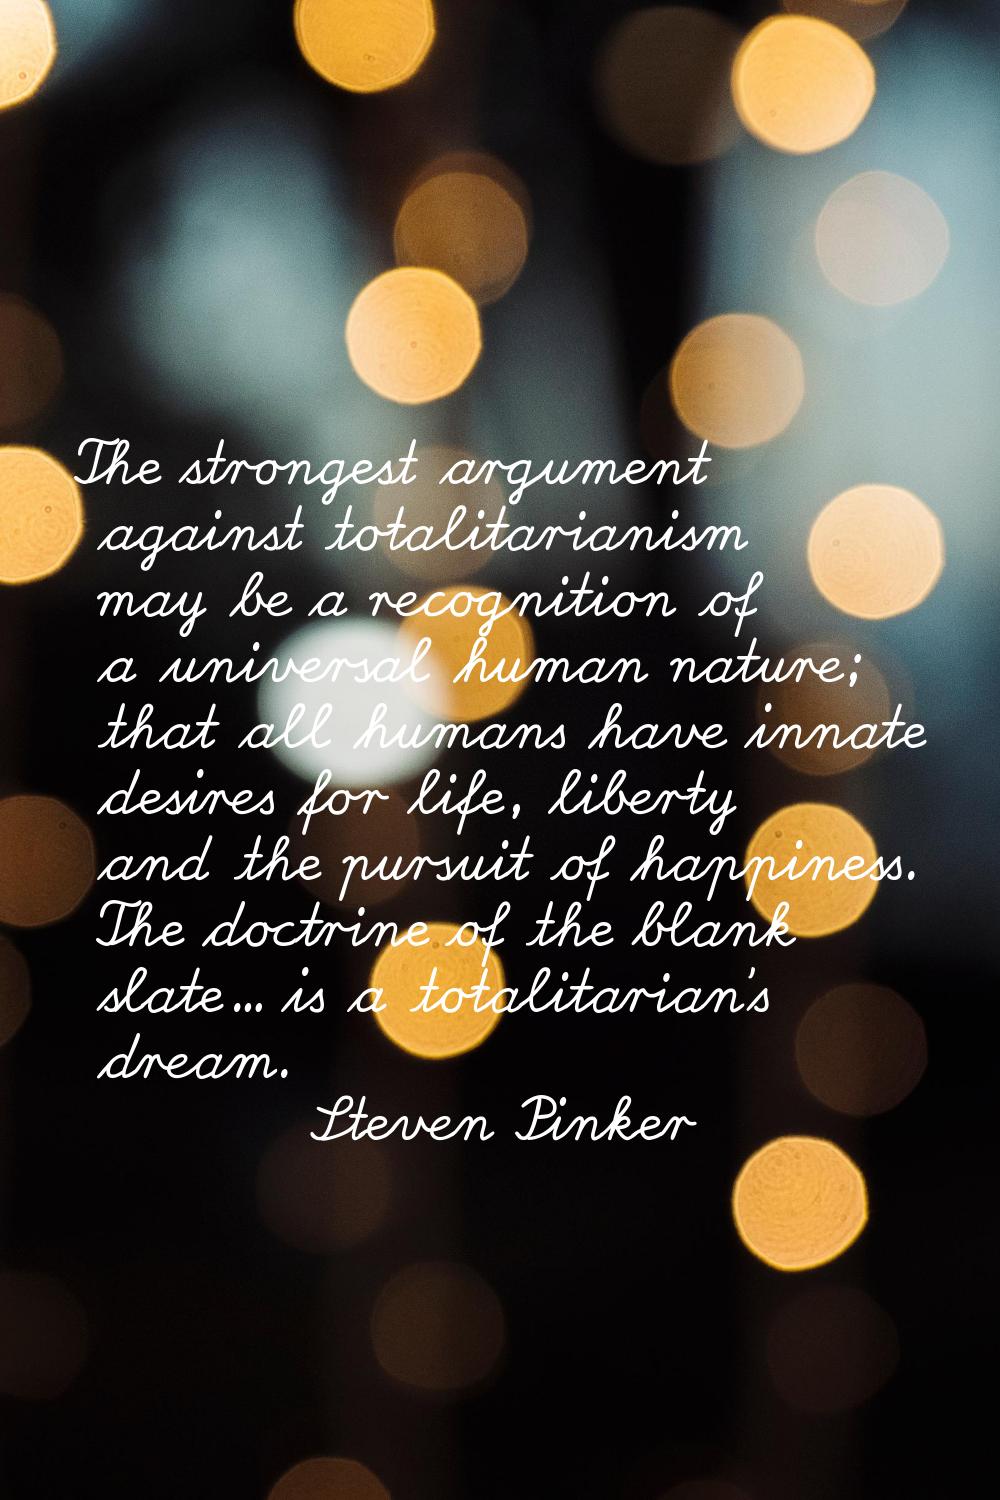 The strongest argument against totalitarianism may be a recognition of a universal human nature; th